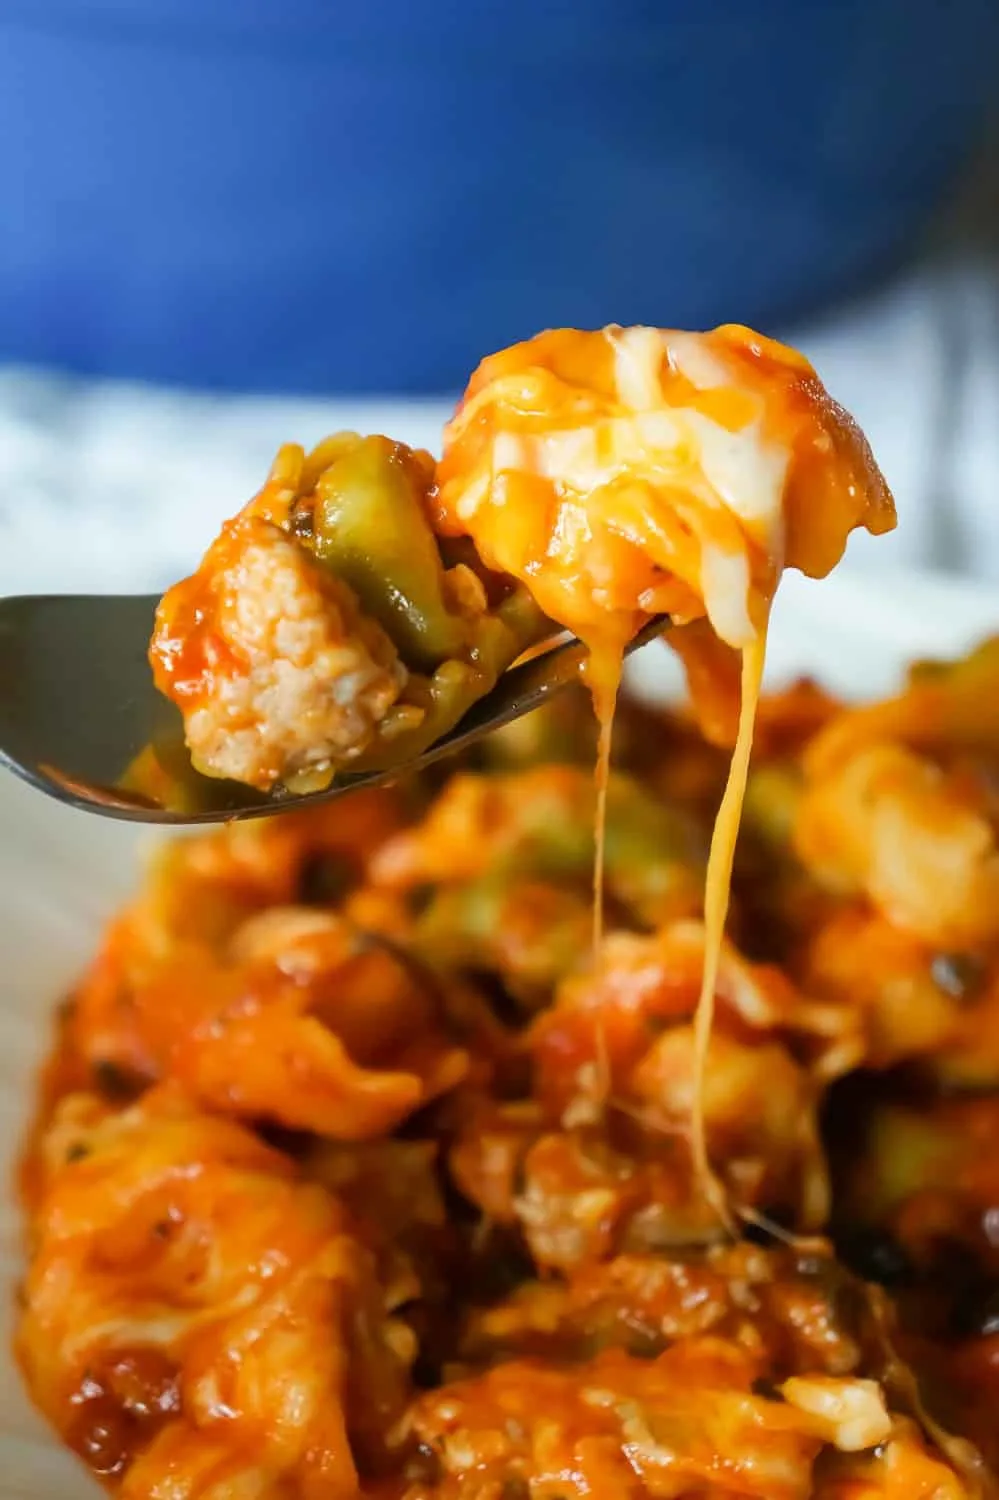 Cheesy Tortellini with Sausage is an easy one pot dinner recipe loaded with ground sausage meat and topped with mozzarella and cheddar cheese.